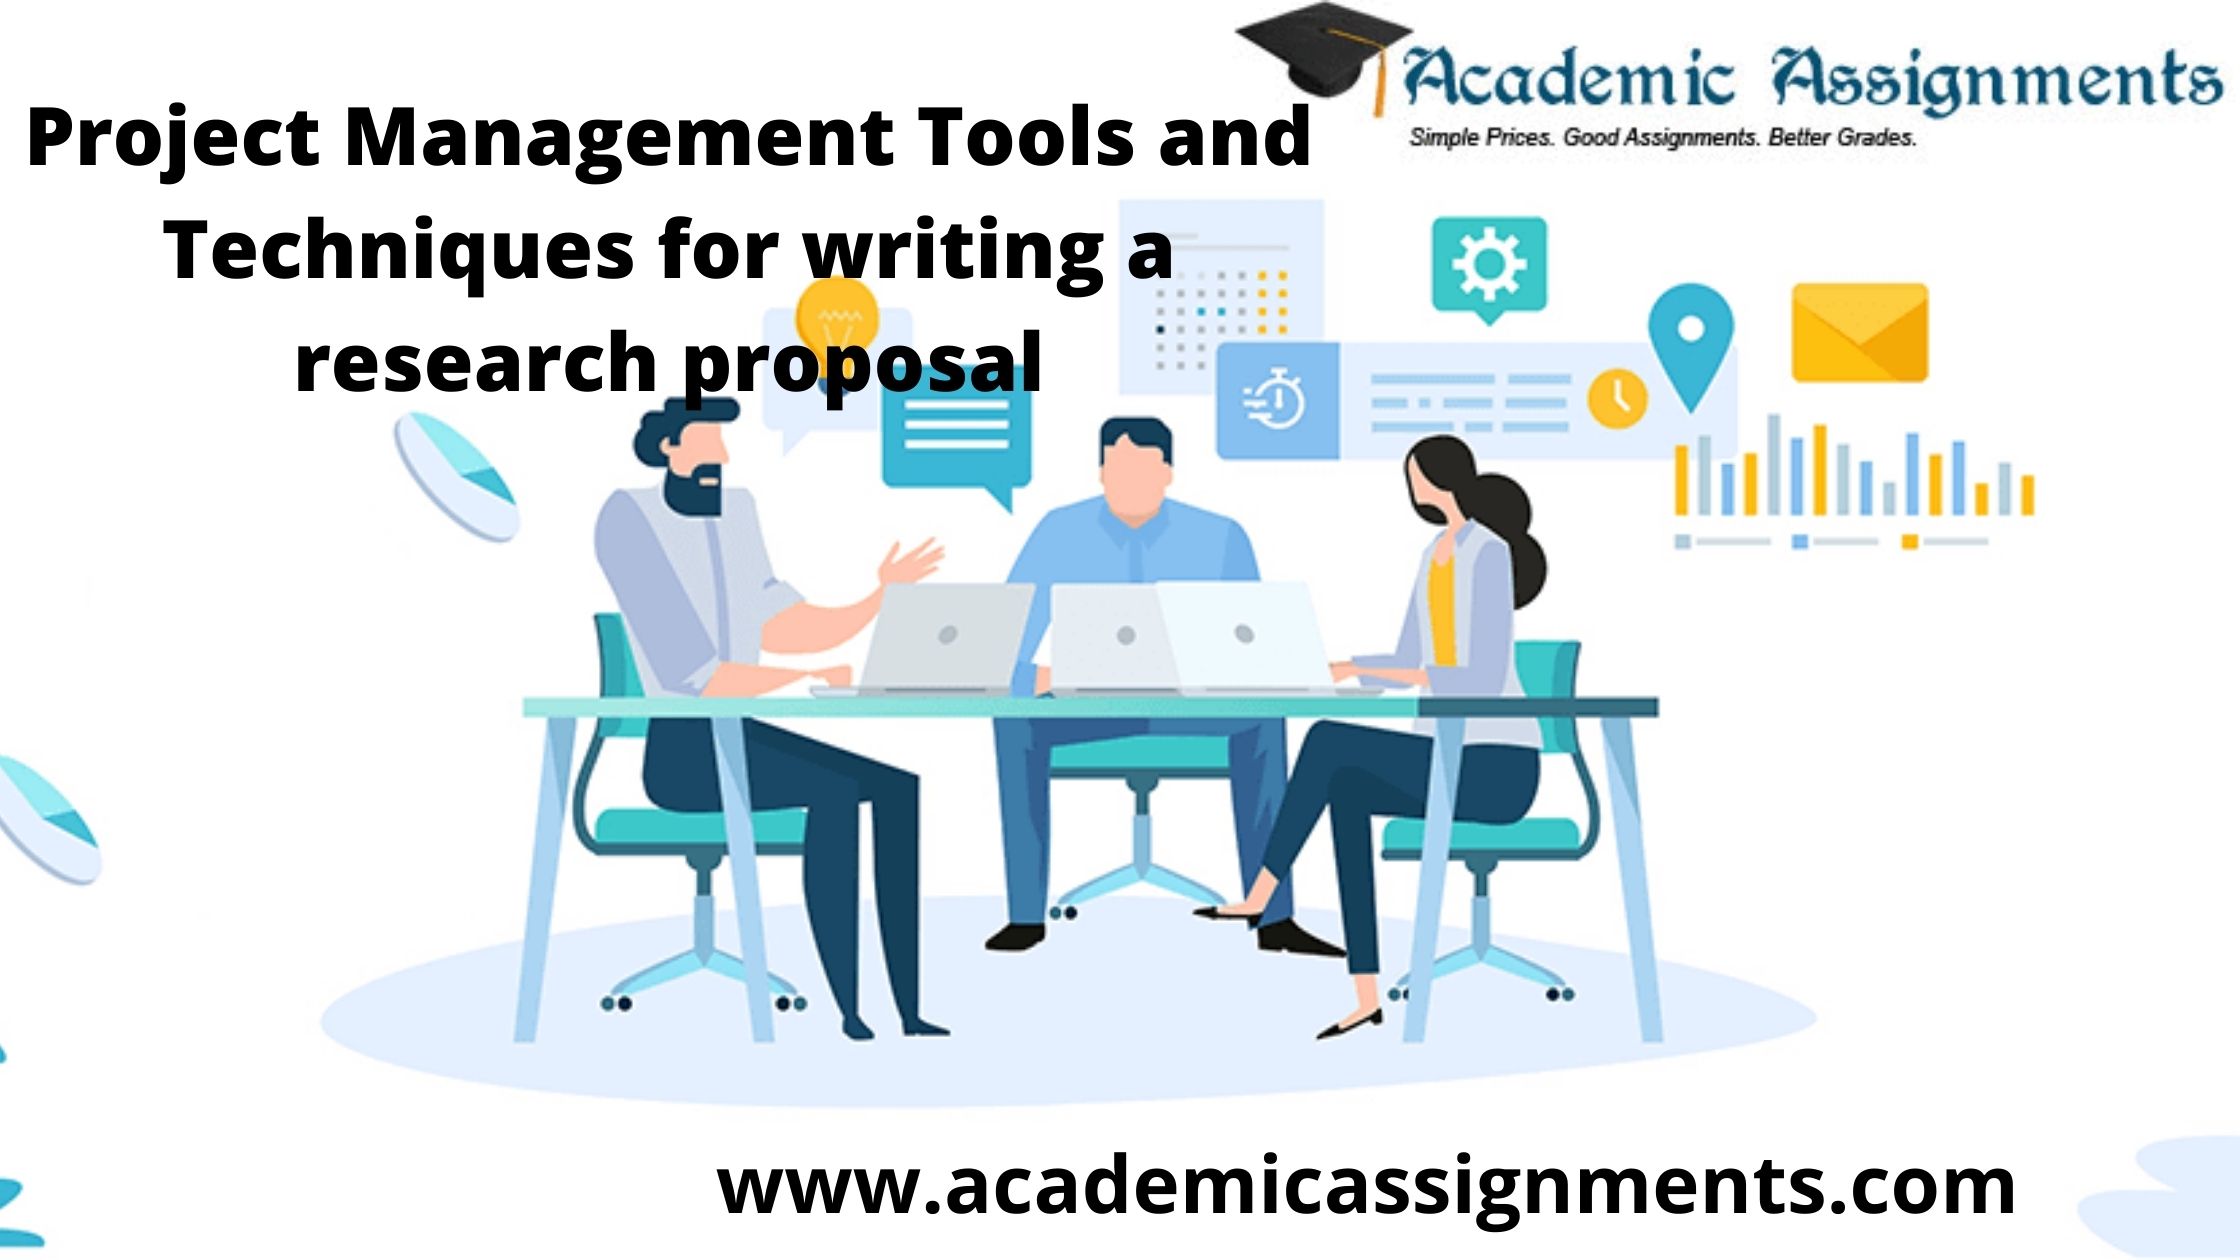 Project Management Tools and Techniques for writing a research proposal